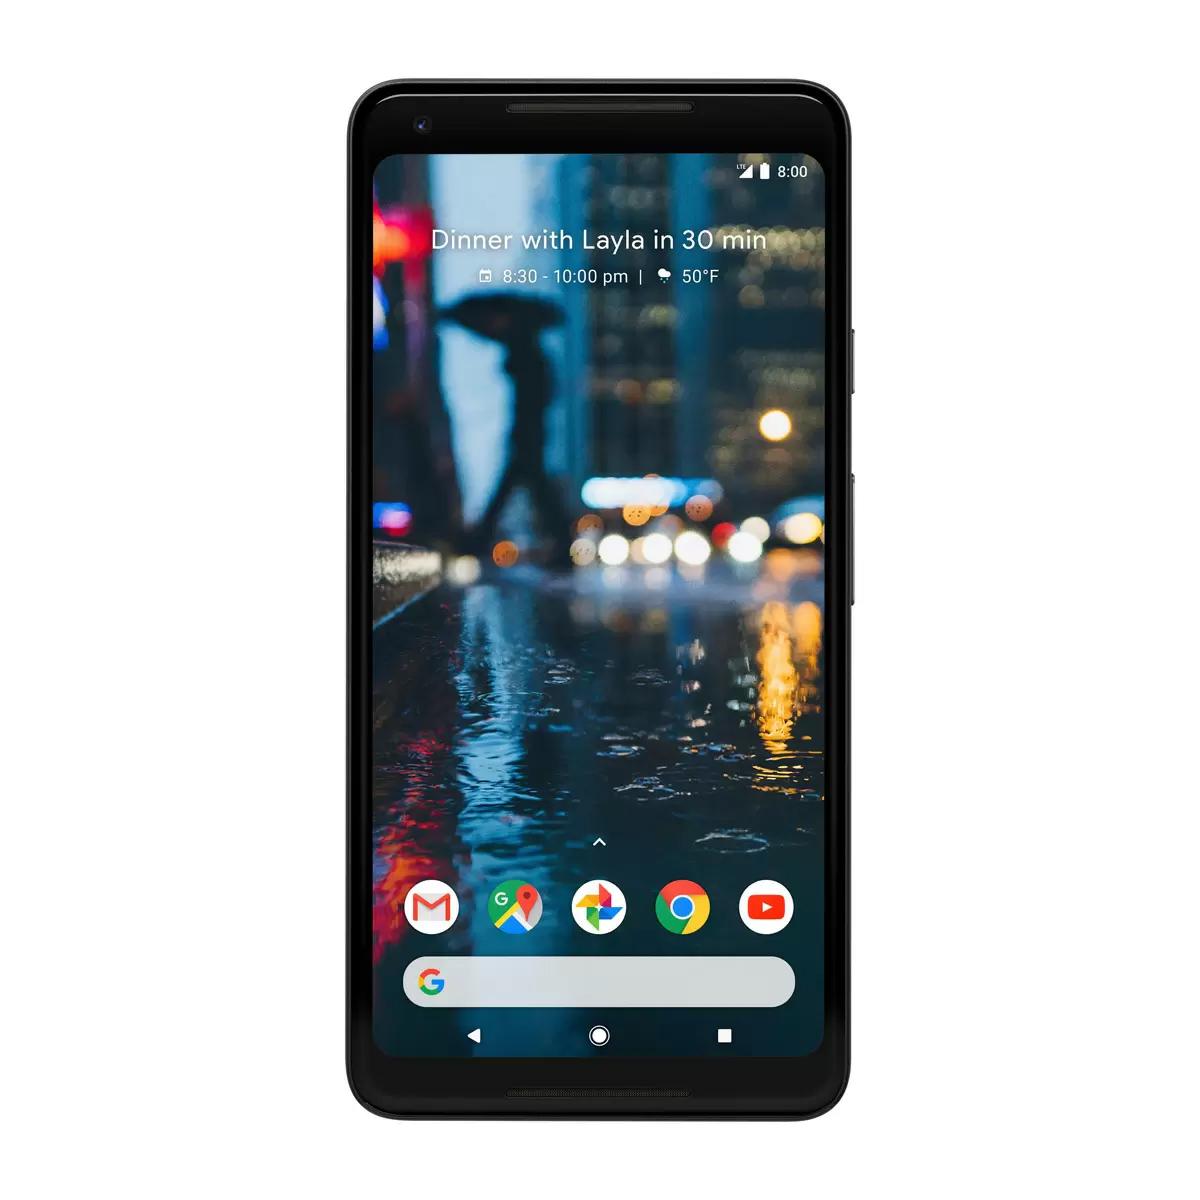 128GB Google Pixel 2 XL Smartphone for $137.99 Shipped